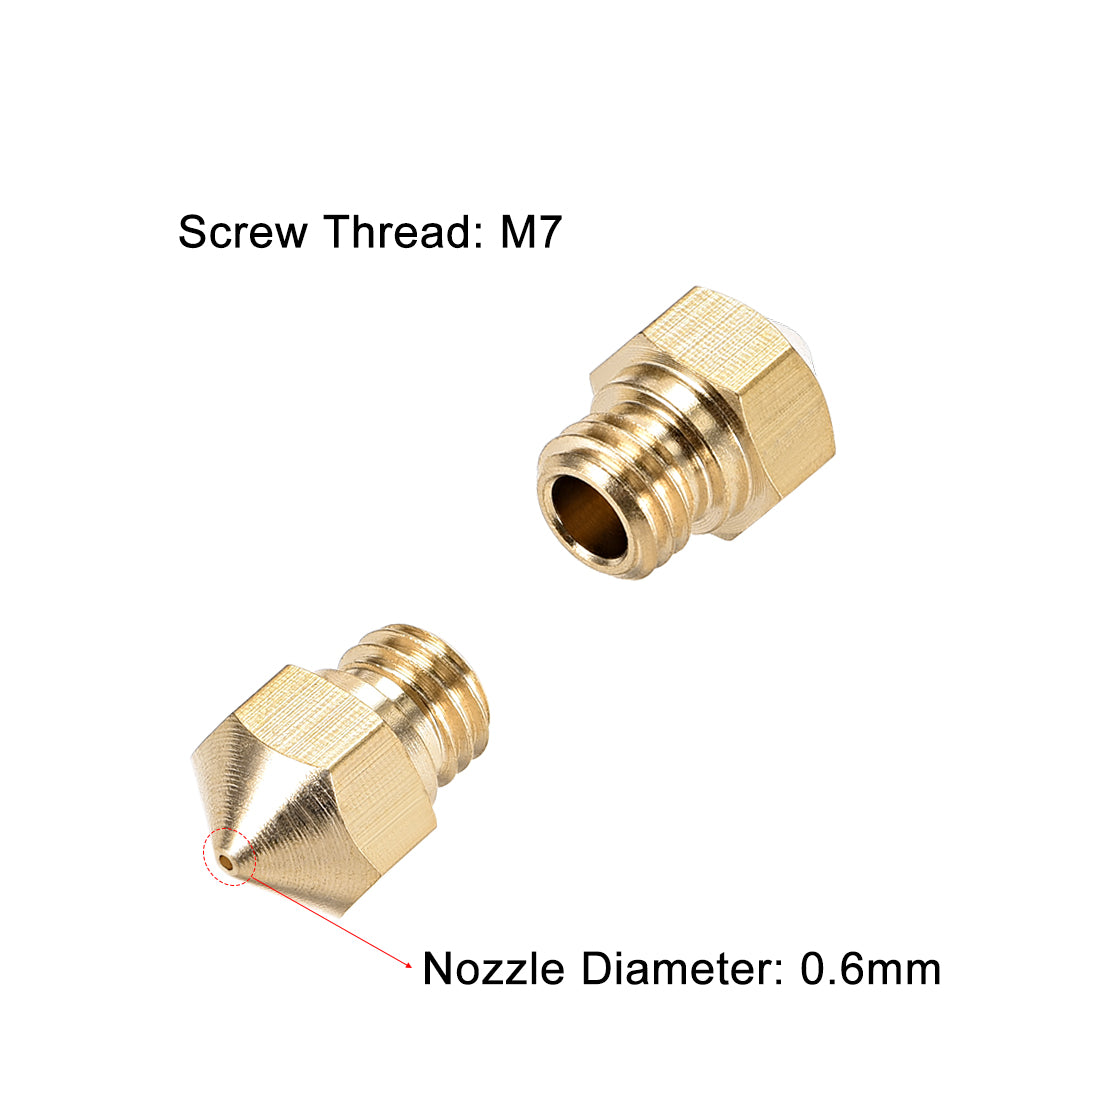 uxcell Uxcell 0.6mm 3D Printer Nozzle, Fit for MK10, for 1.75mm Filament Brass 2pcs